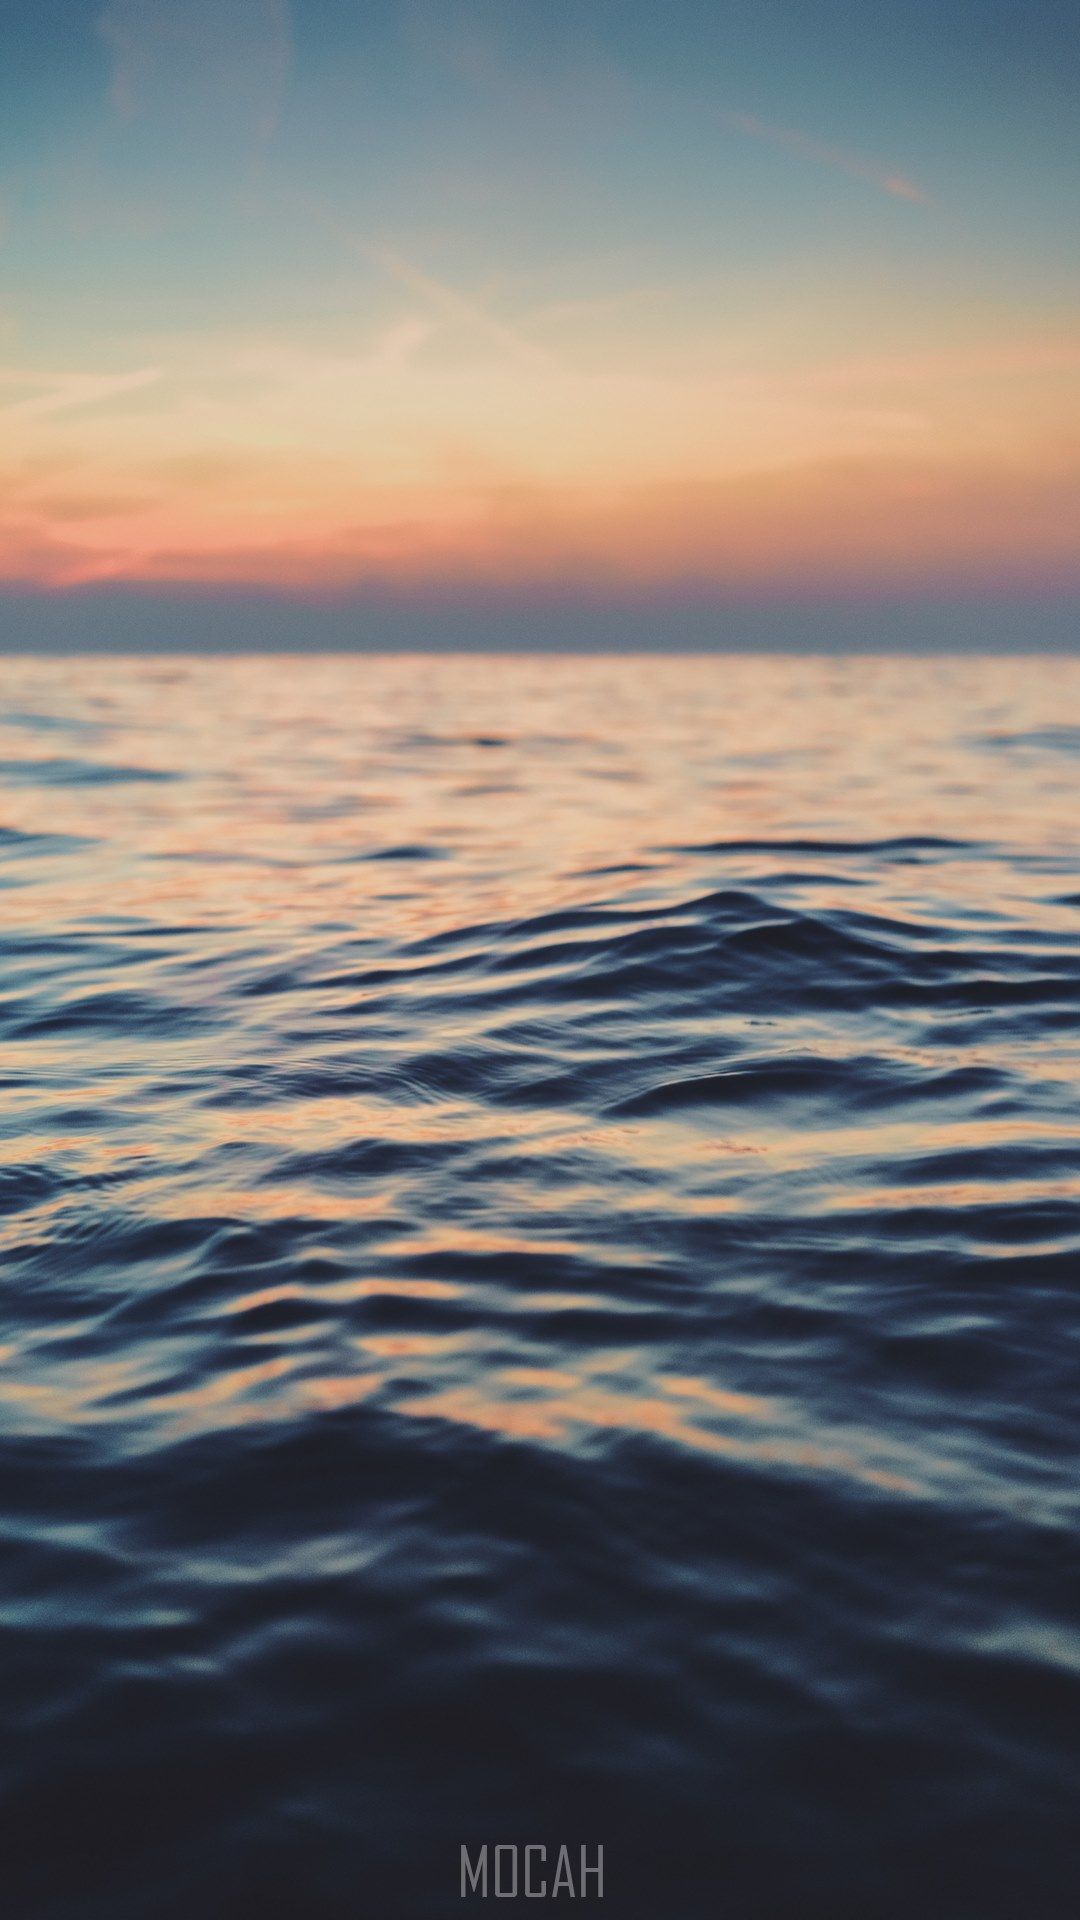 IPhone wallpaper of a calm sea with a sunset in the background - Water